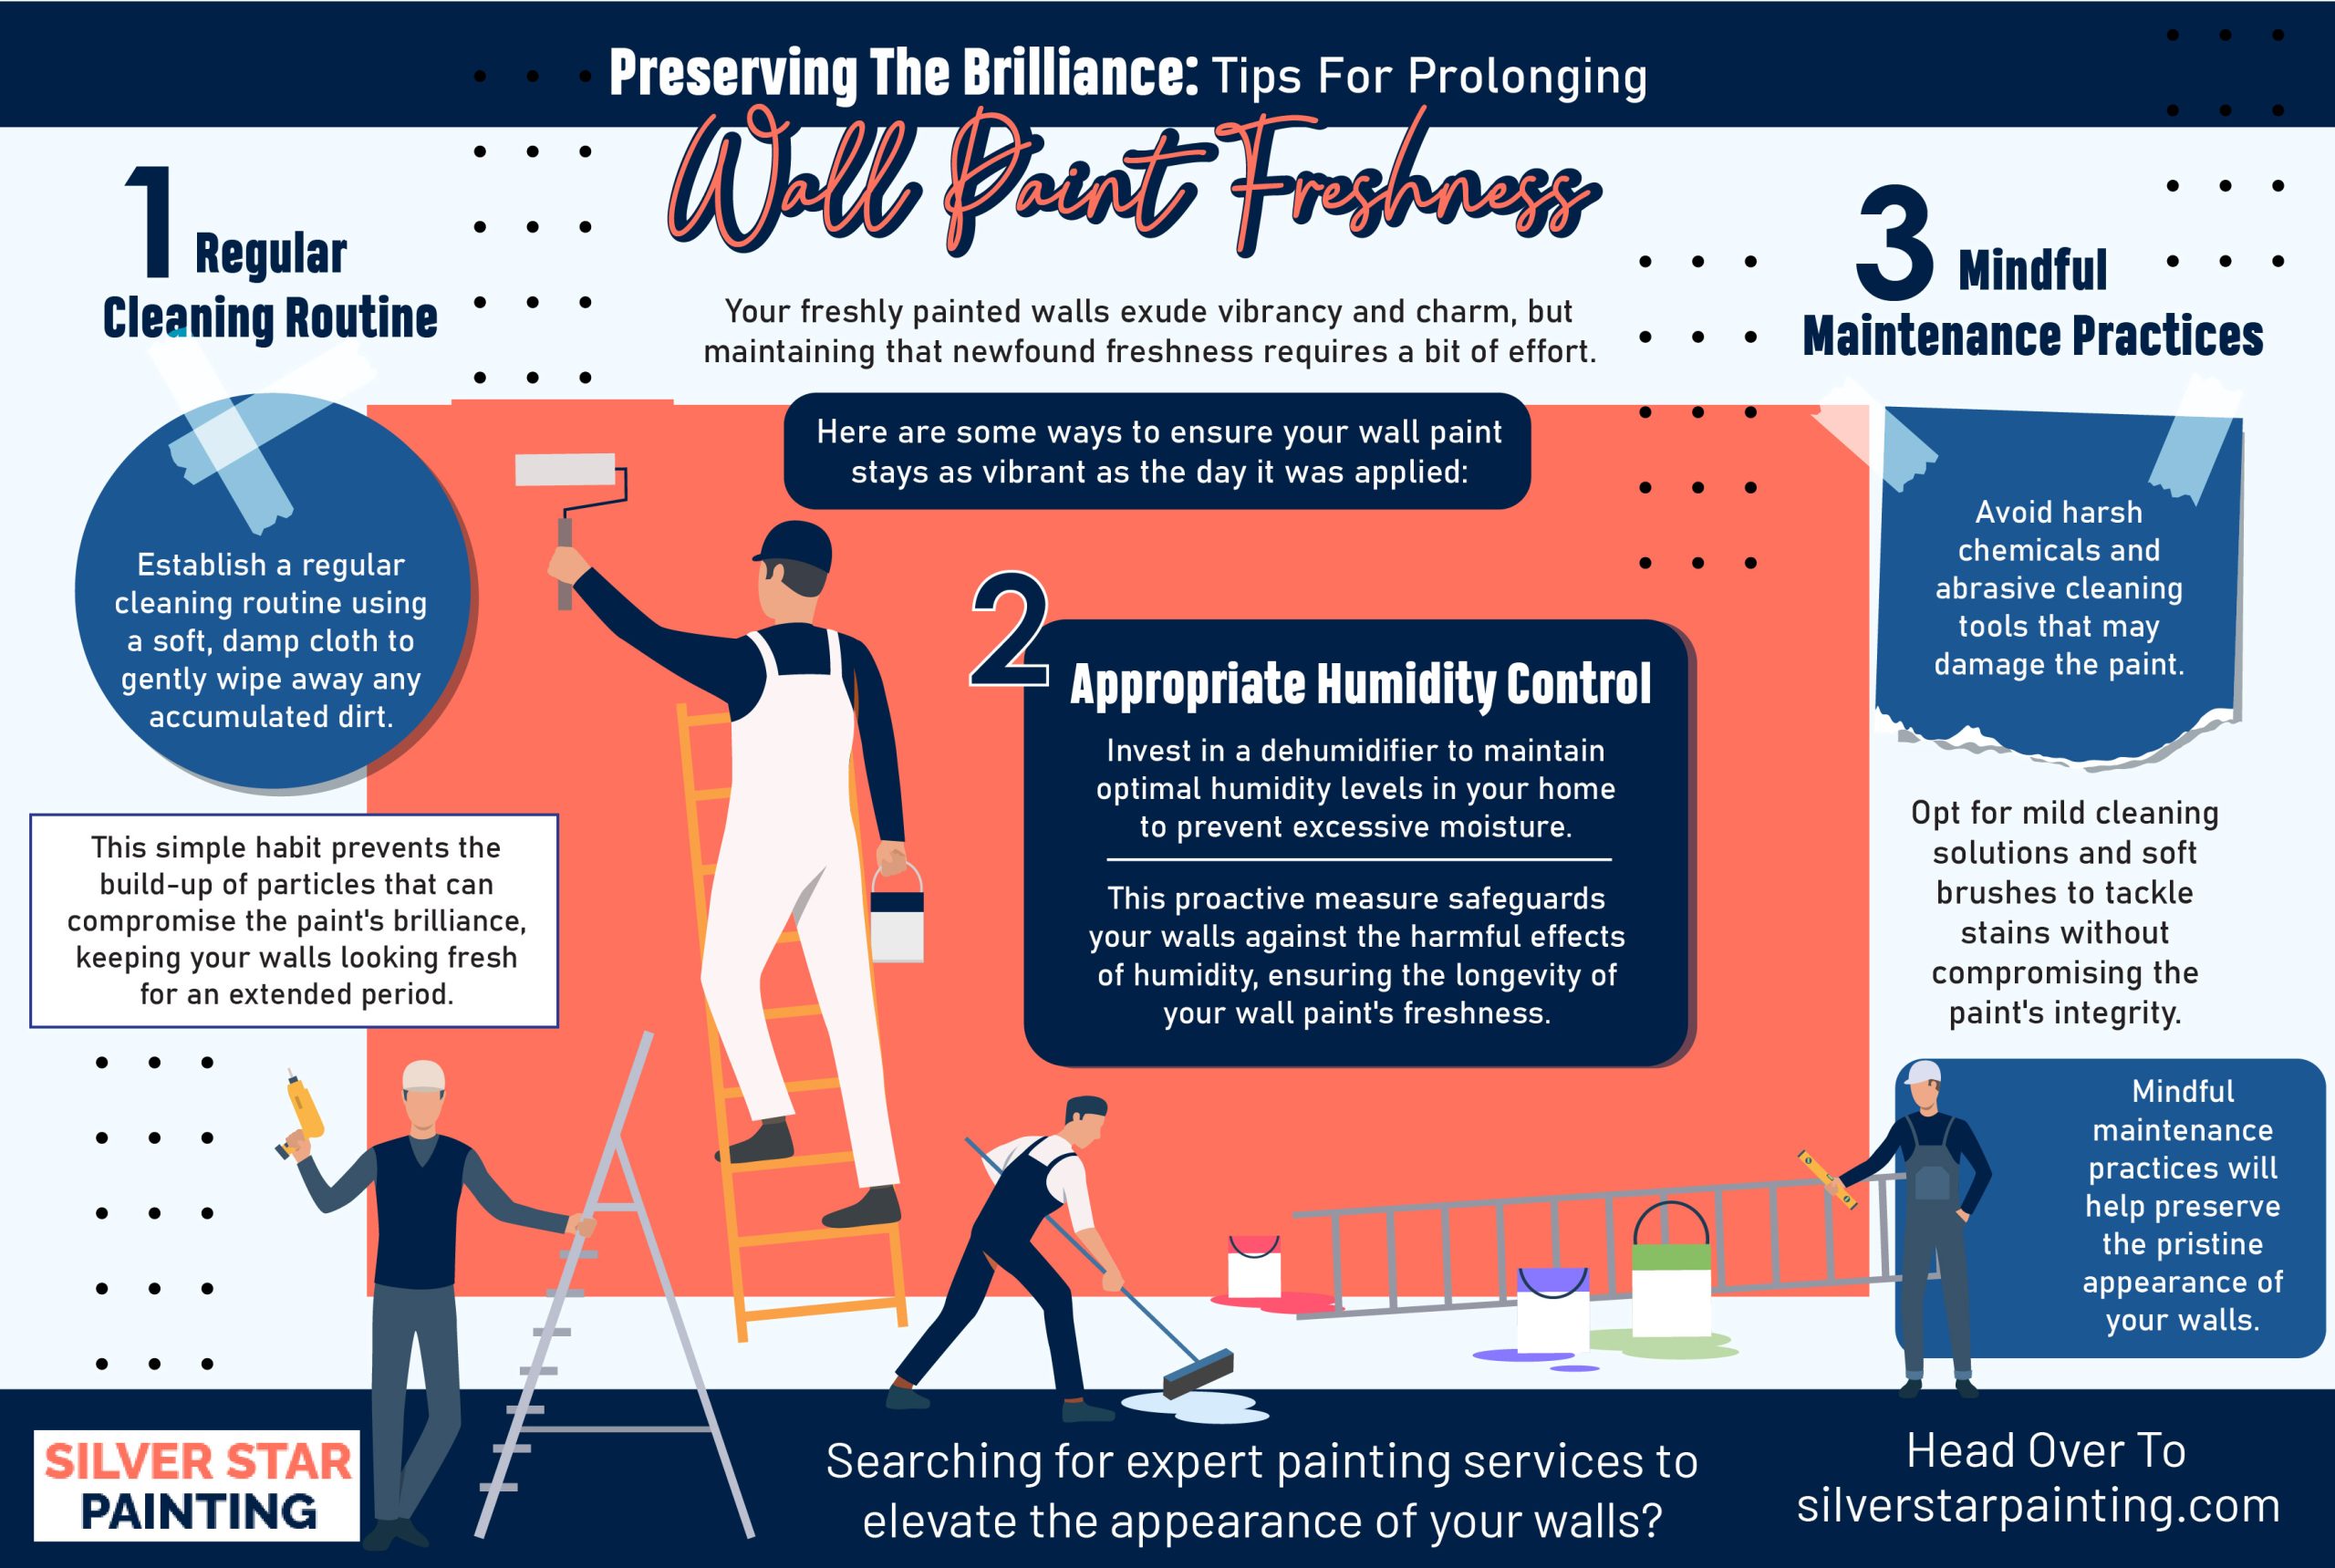 Preserving the Brilliance: Tips for Prolonging - An Infographic